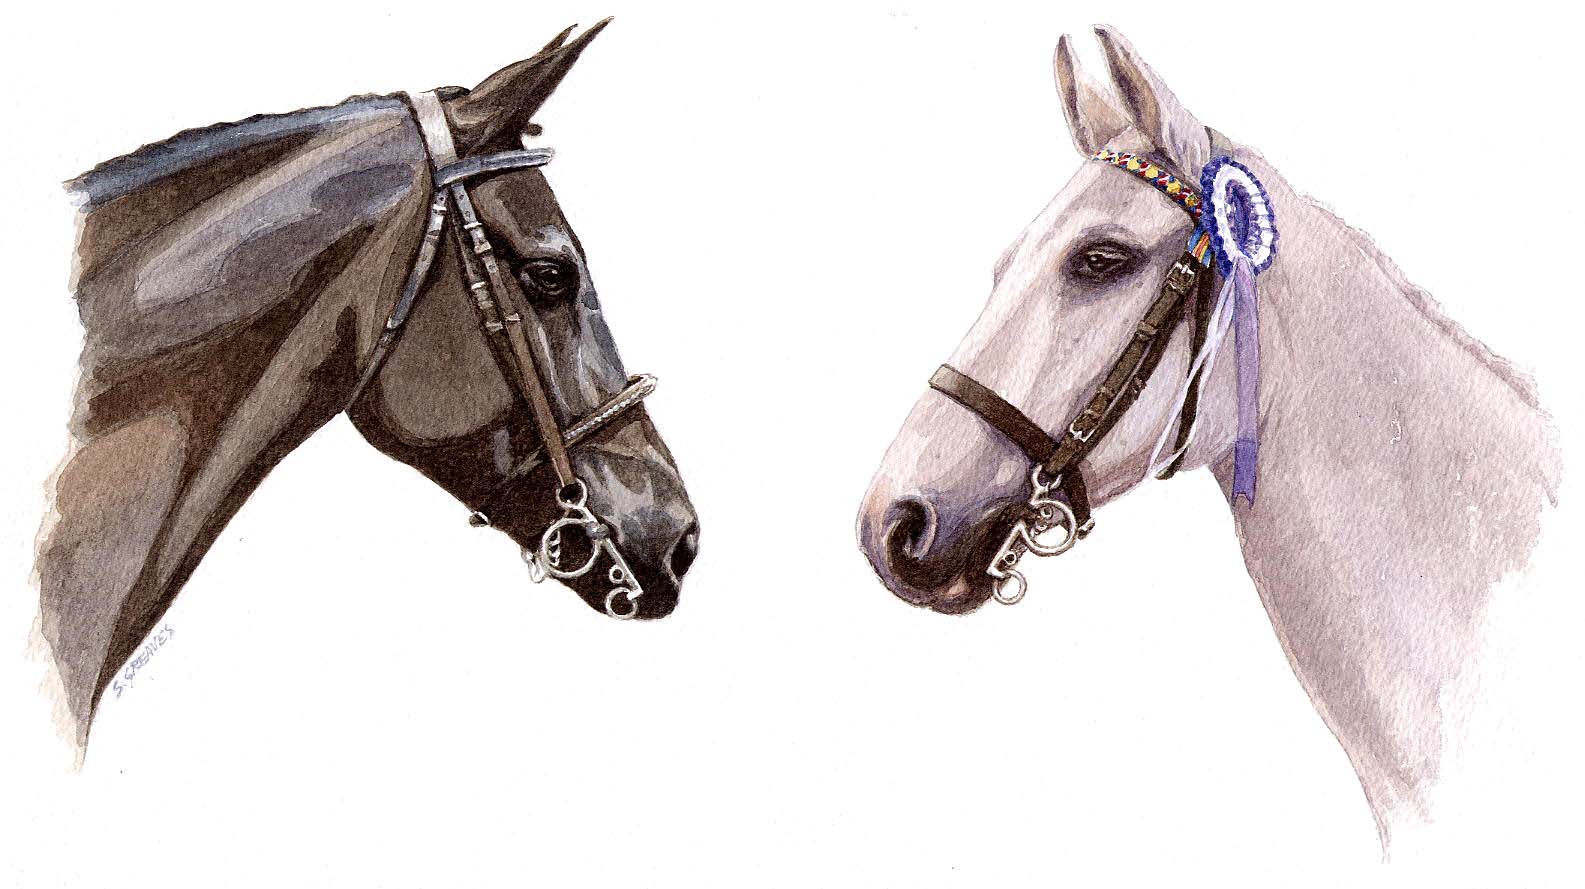 Steve Greaves - Beau & Charne, two horses - watercolour painting